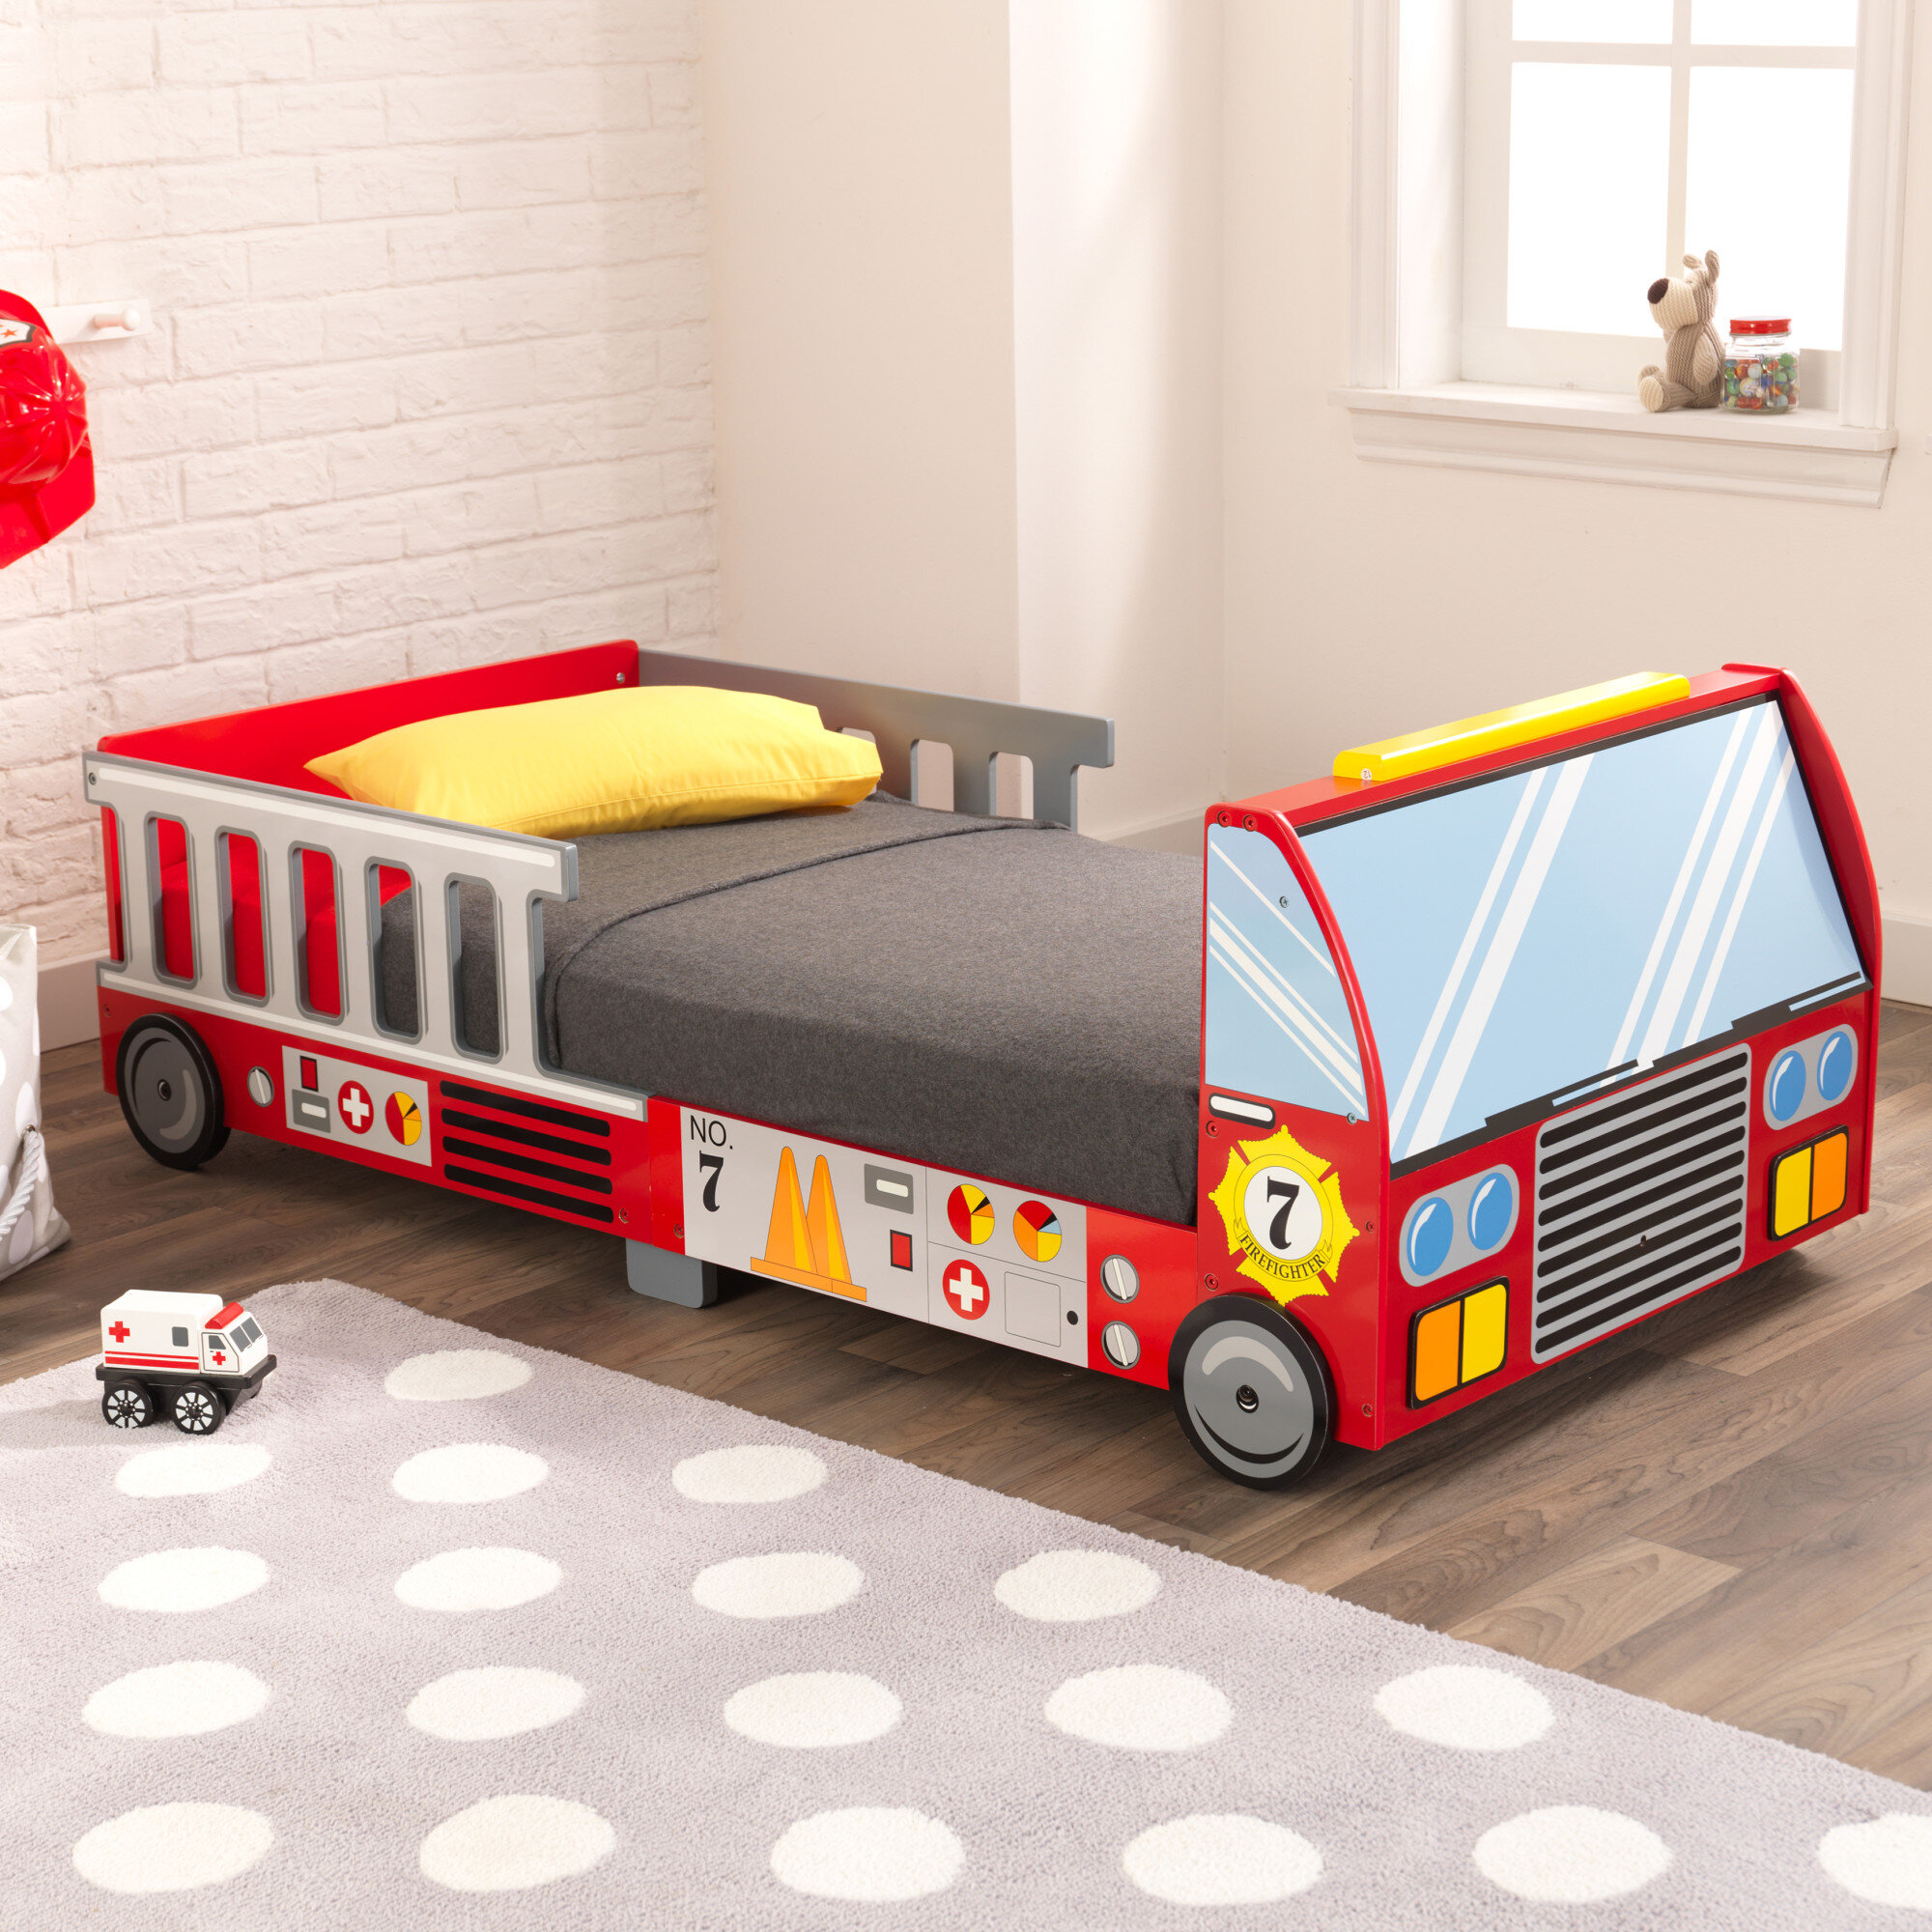 CAR BED Children Kids Bed FREE DELIVERY 160x80 140x70 FREE MATTRESS 